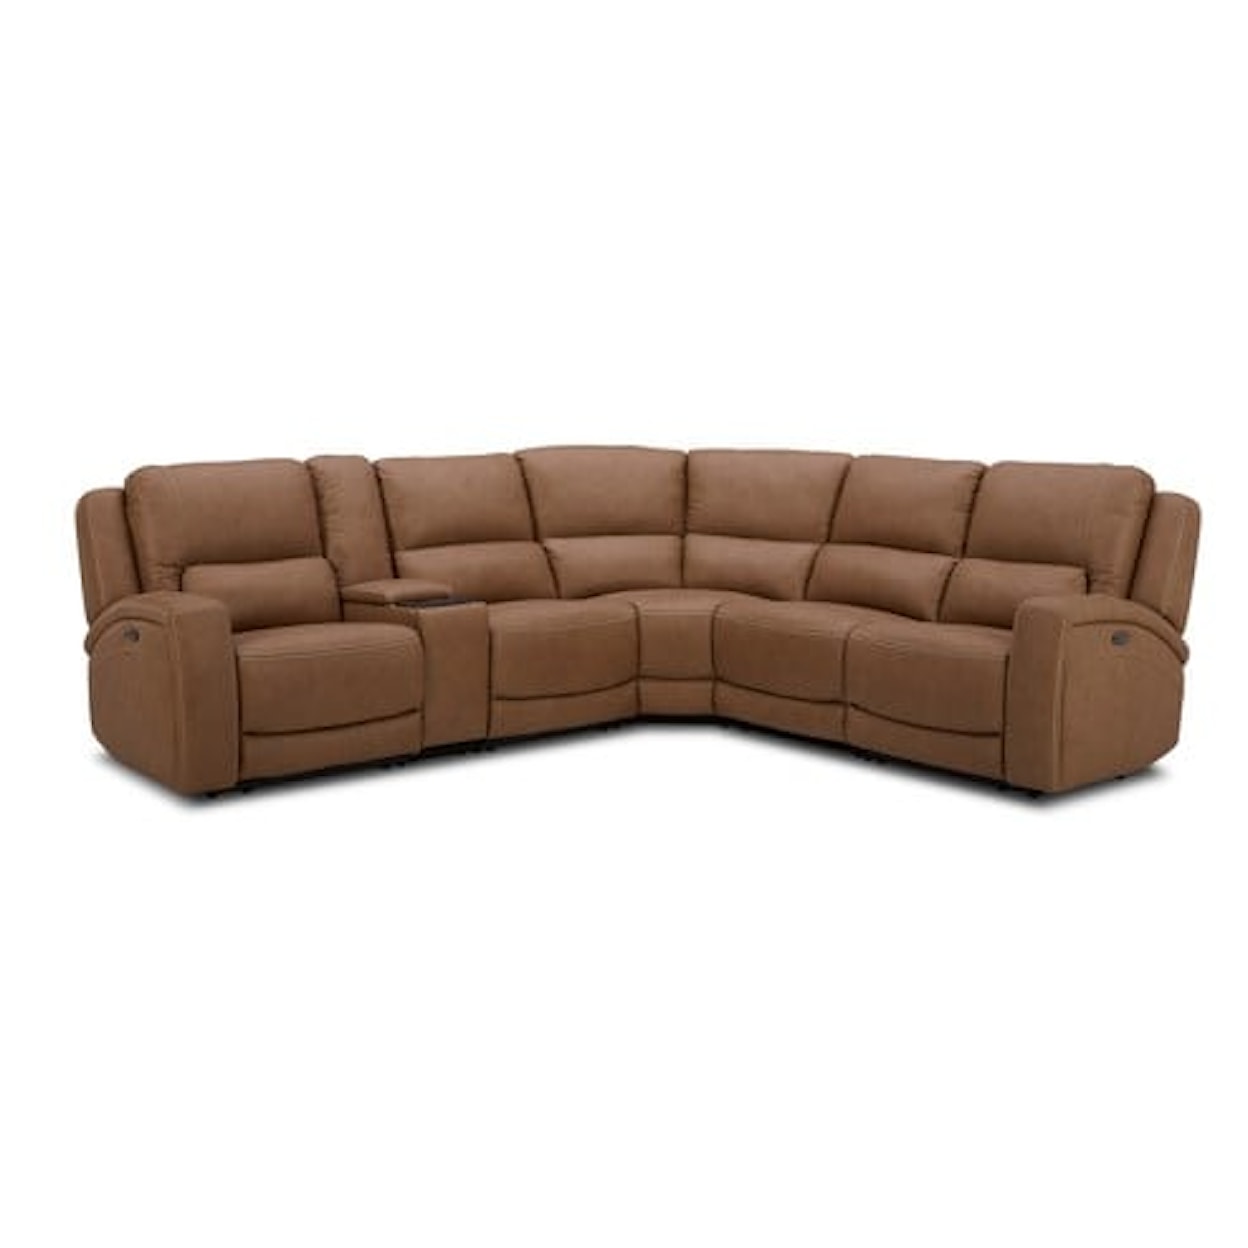 Kuka Home Bison Bison Leather Power Sectional